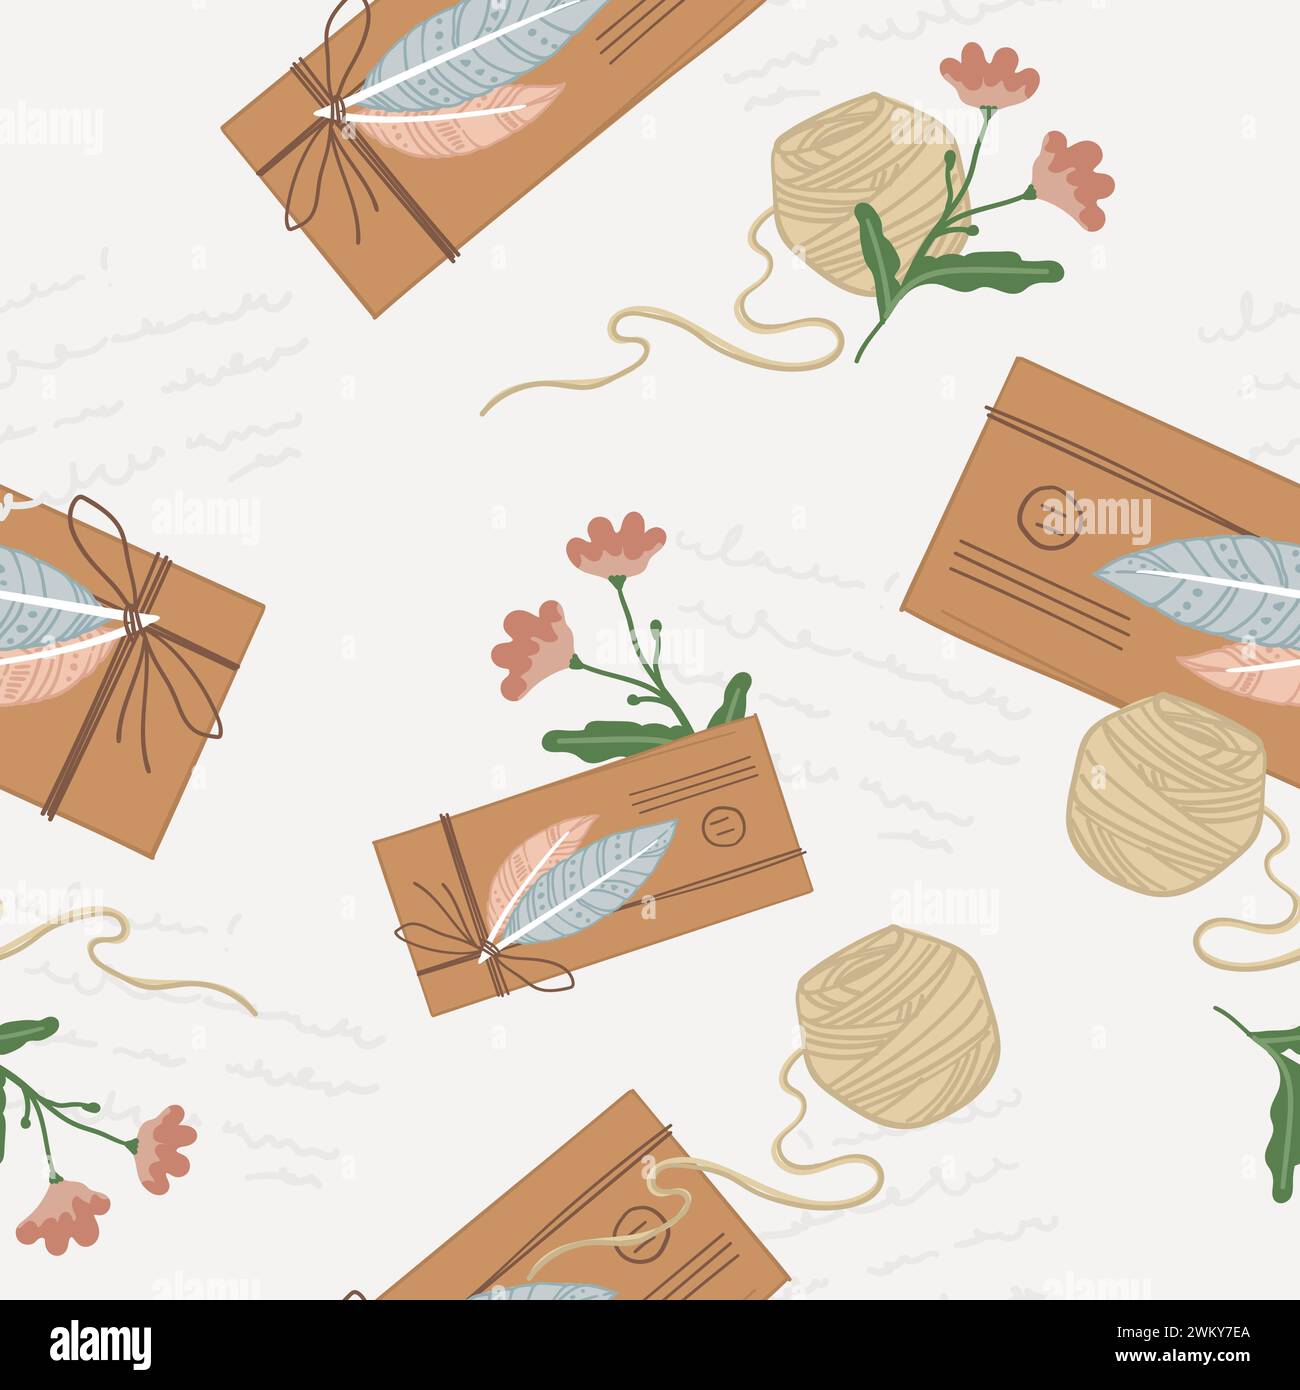 Romantic Letters and Wax Seals Pattern Stock Vector